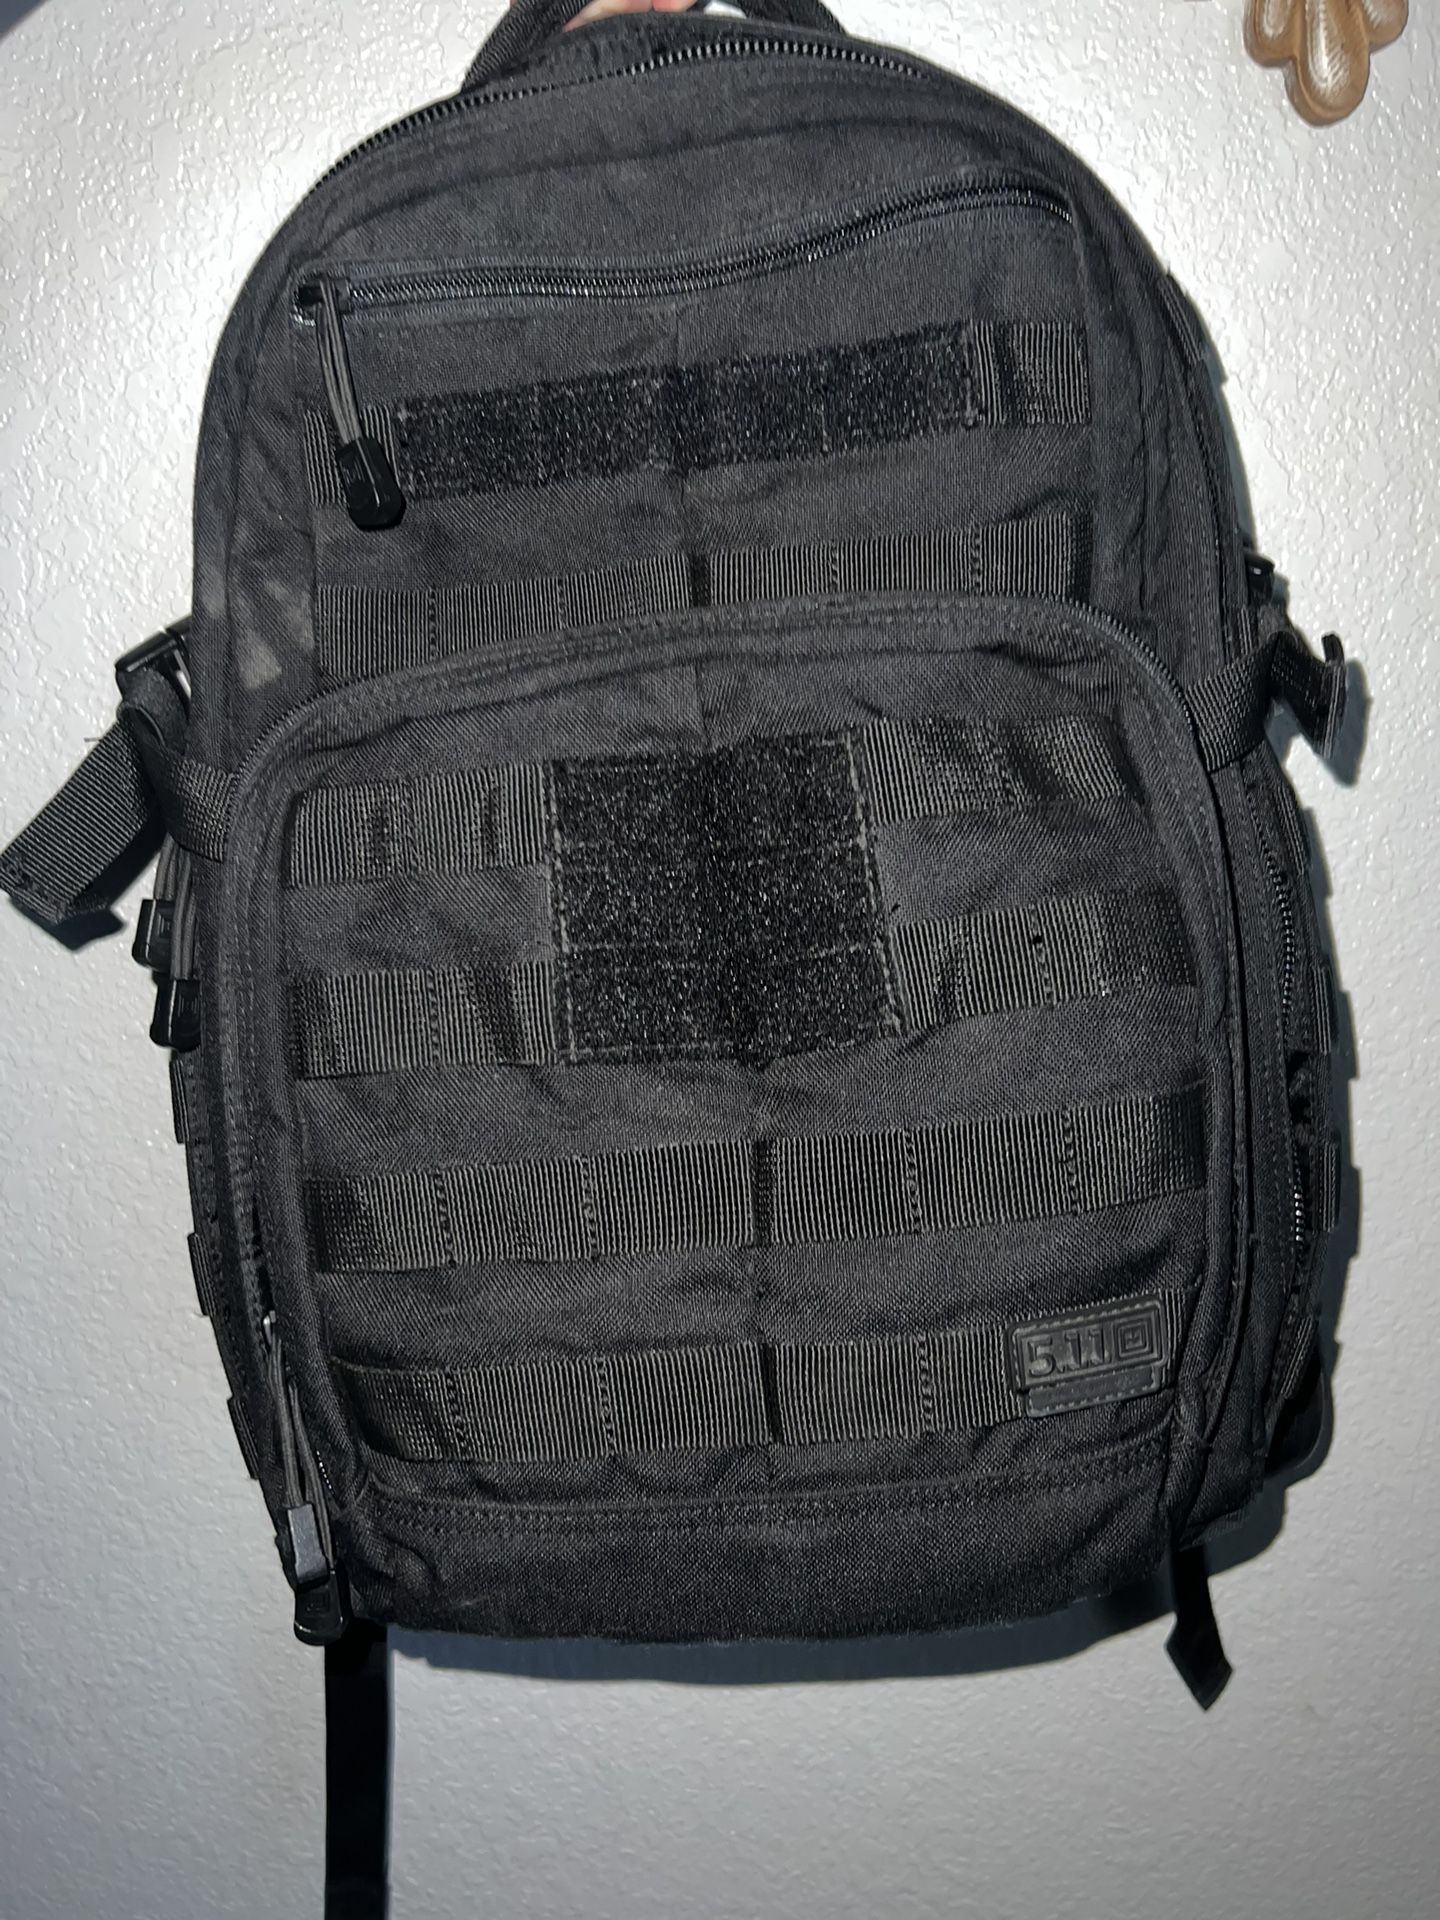 5.11 Rush 12 Tactical Backpack 